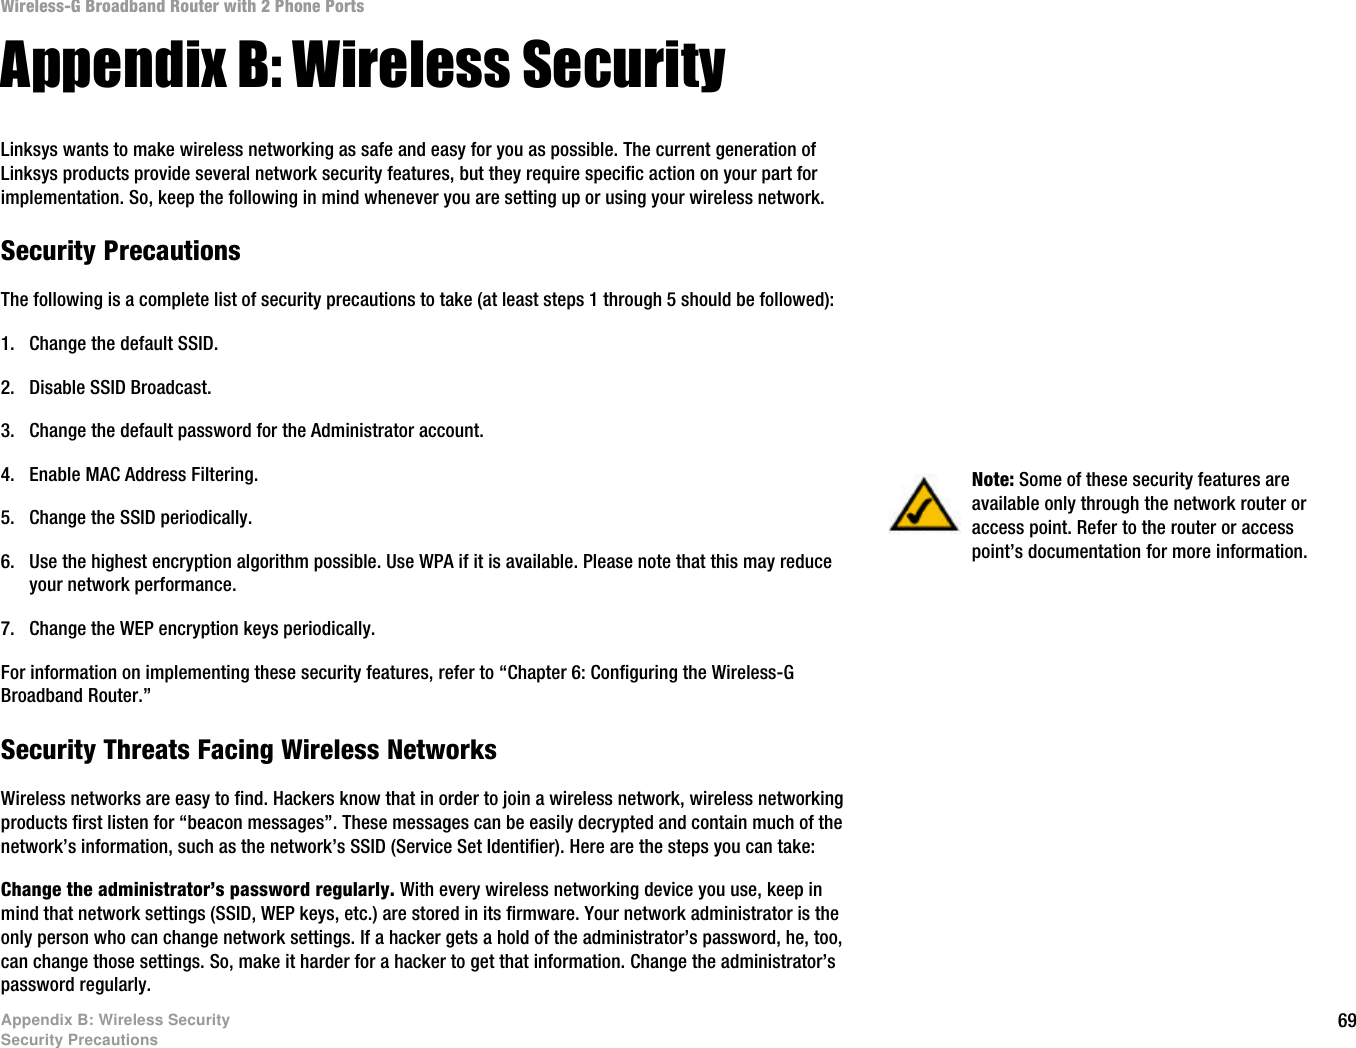 69Appendix B: Wireless SecuritySecurity PrecautionsWireless-G Broadband Router with 2 Phone PortsAppendix B: Wireless SecurityLinksys wants to make wireless networking as safe and easy for you as possible. The current generation of Linksys products provide several network security features, but they require specific action on your part for implementation. So, keep the following in mind whenever you are setting up or using your wireless network.Security PrecautionsThe following is a complete list of security precautions to take (at least steps 1 through 5 should be followed):1. Change the default SSID. 2. Disable SSID Broadcast. 3. Change the default password for the Administrator account. 4. Enable MAC Address Filtering. 5. Change the SSID periodically. 6. Use the highest encryption algorithm possible. Use WPA if it is available. Please note that this may reduce your network performance. 7. Change the WEP encryption keys periodically. For information on implementing these security features, refer to “Chapter 6: Configuring the Wireless-G Broadband Router.”Security Threats Facing Wireless Networks Wireless networks are easy to find. Hackers know that in order to join a wireless network, wireless networking products first listen for “beacon messages”. These messages can be easily decrypted and contain much of the network’s information, such as the network’s SSID (Service Set Identifier). Here are the steps you can take:Change the administrator’s password regularly. With every wireless networking device you use, keep in mind that network settings (SSID, WEP keys, etc.) are stored in its firmware. Your network administrator is the only person who can change network settings. If a hacker gets a hold of the administrator’s password, he, too, can change those settings. So, make it harder for a hacker to get that information. Change the administrator’s password regularly.Note: Some of these security features are available only through the network router or access point. Refer to the router or access point’s documentation for more information.